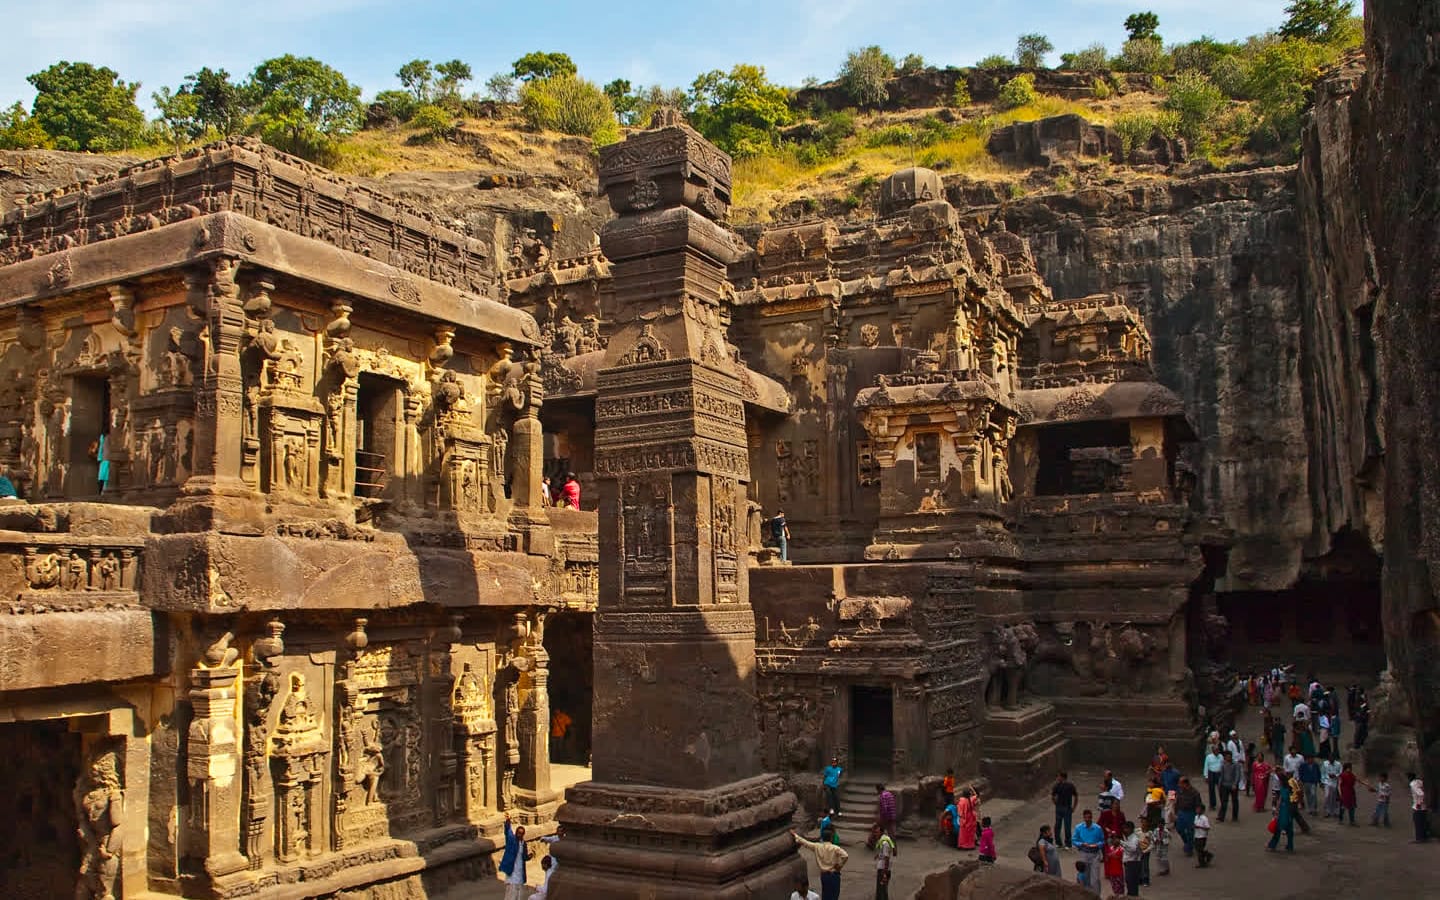 The rock-cave Kailash Temple in Ellora (INDIA) is the largest monolithic structure in the world. It was carved top to bottom in the 8th century and the main structure exists despite many attempts to destroy it.